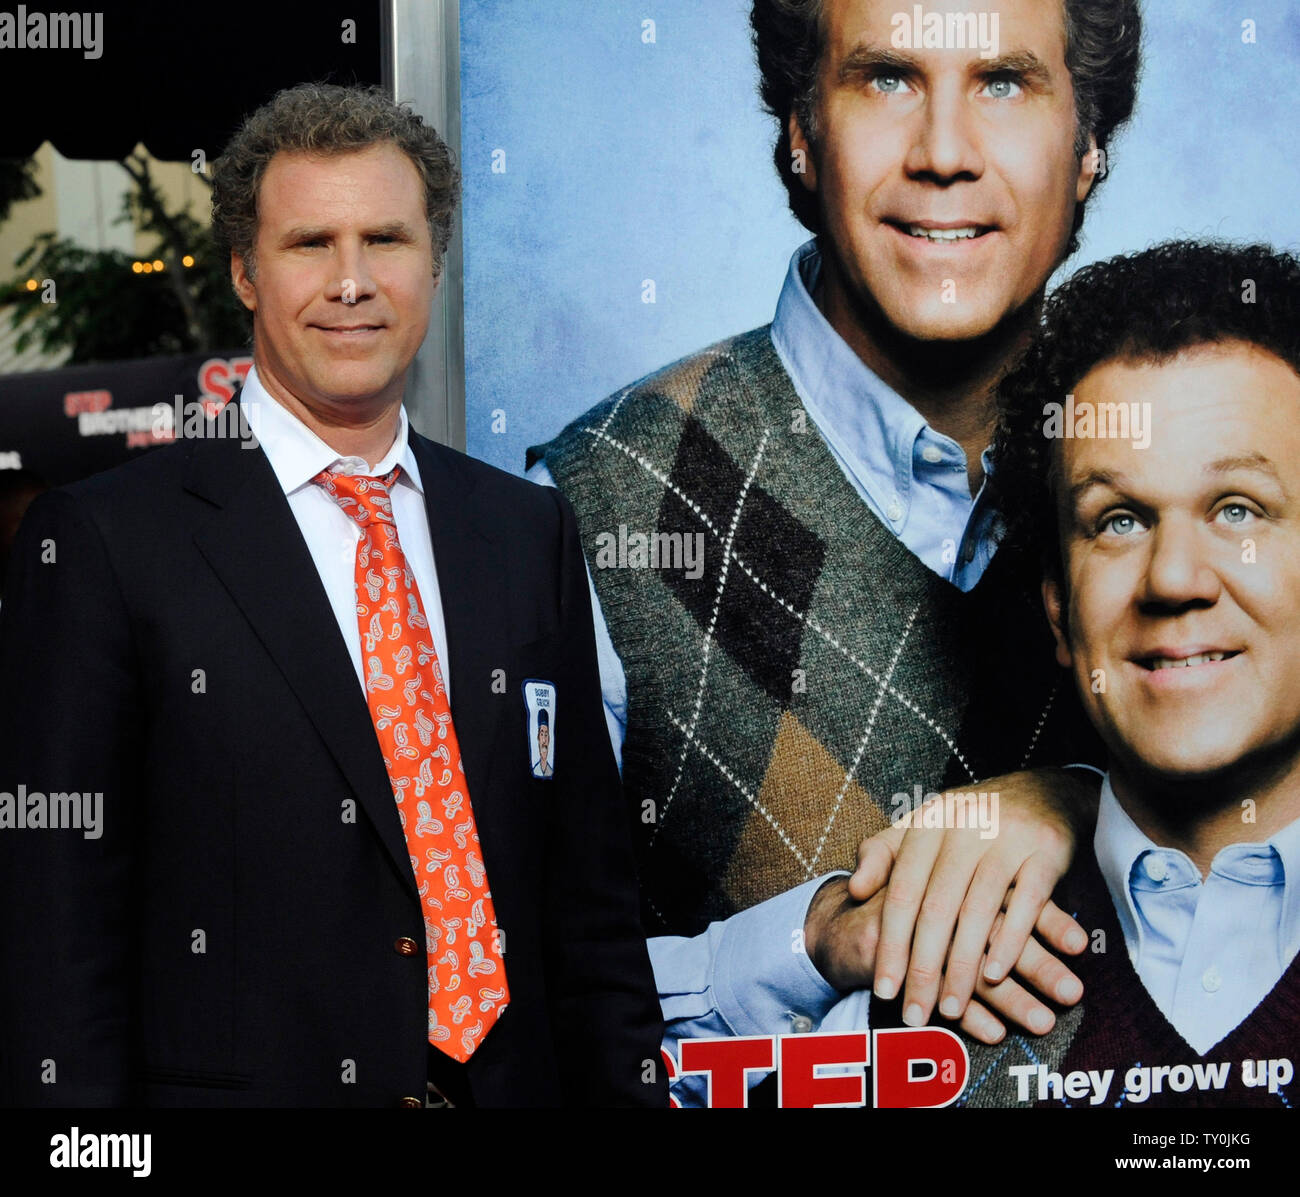 Will Ferrell, a cast member in the motion picture comedy "Step Brothers", attends the premiere of the film in Los Angeles on July 15, 2008. Photo/Jim Ruymen Stock Photo - Alamy